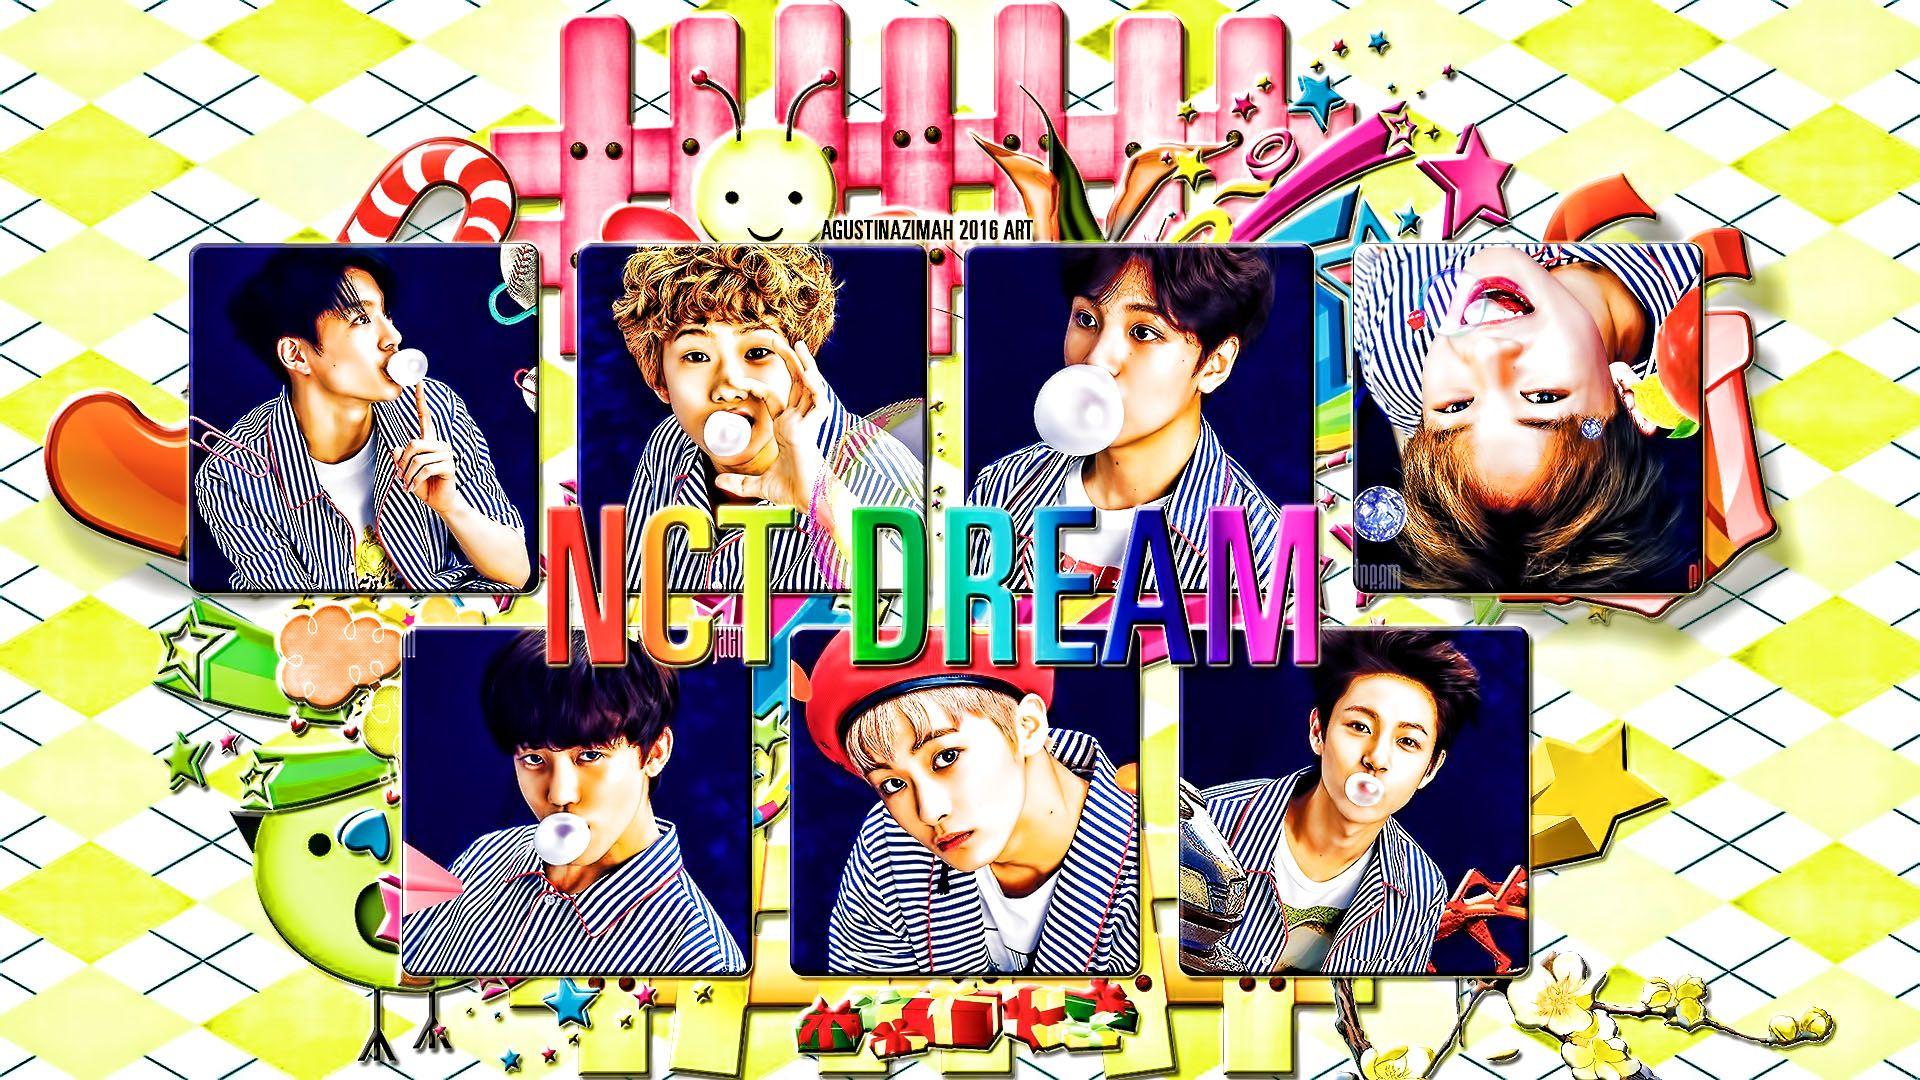 Nct Dream 4k Wallpapers Top Free Nct Dream 4k Backgrounds Wallpaperaccess 9939